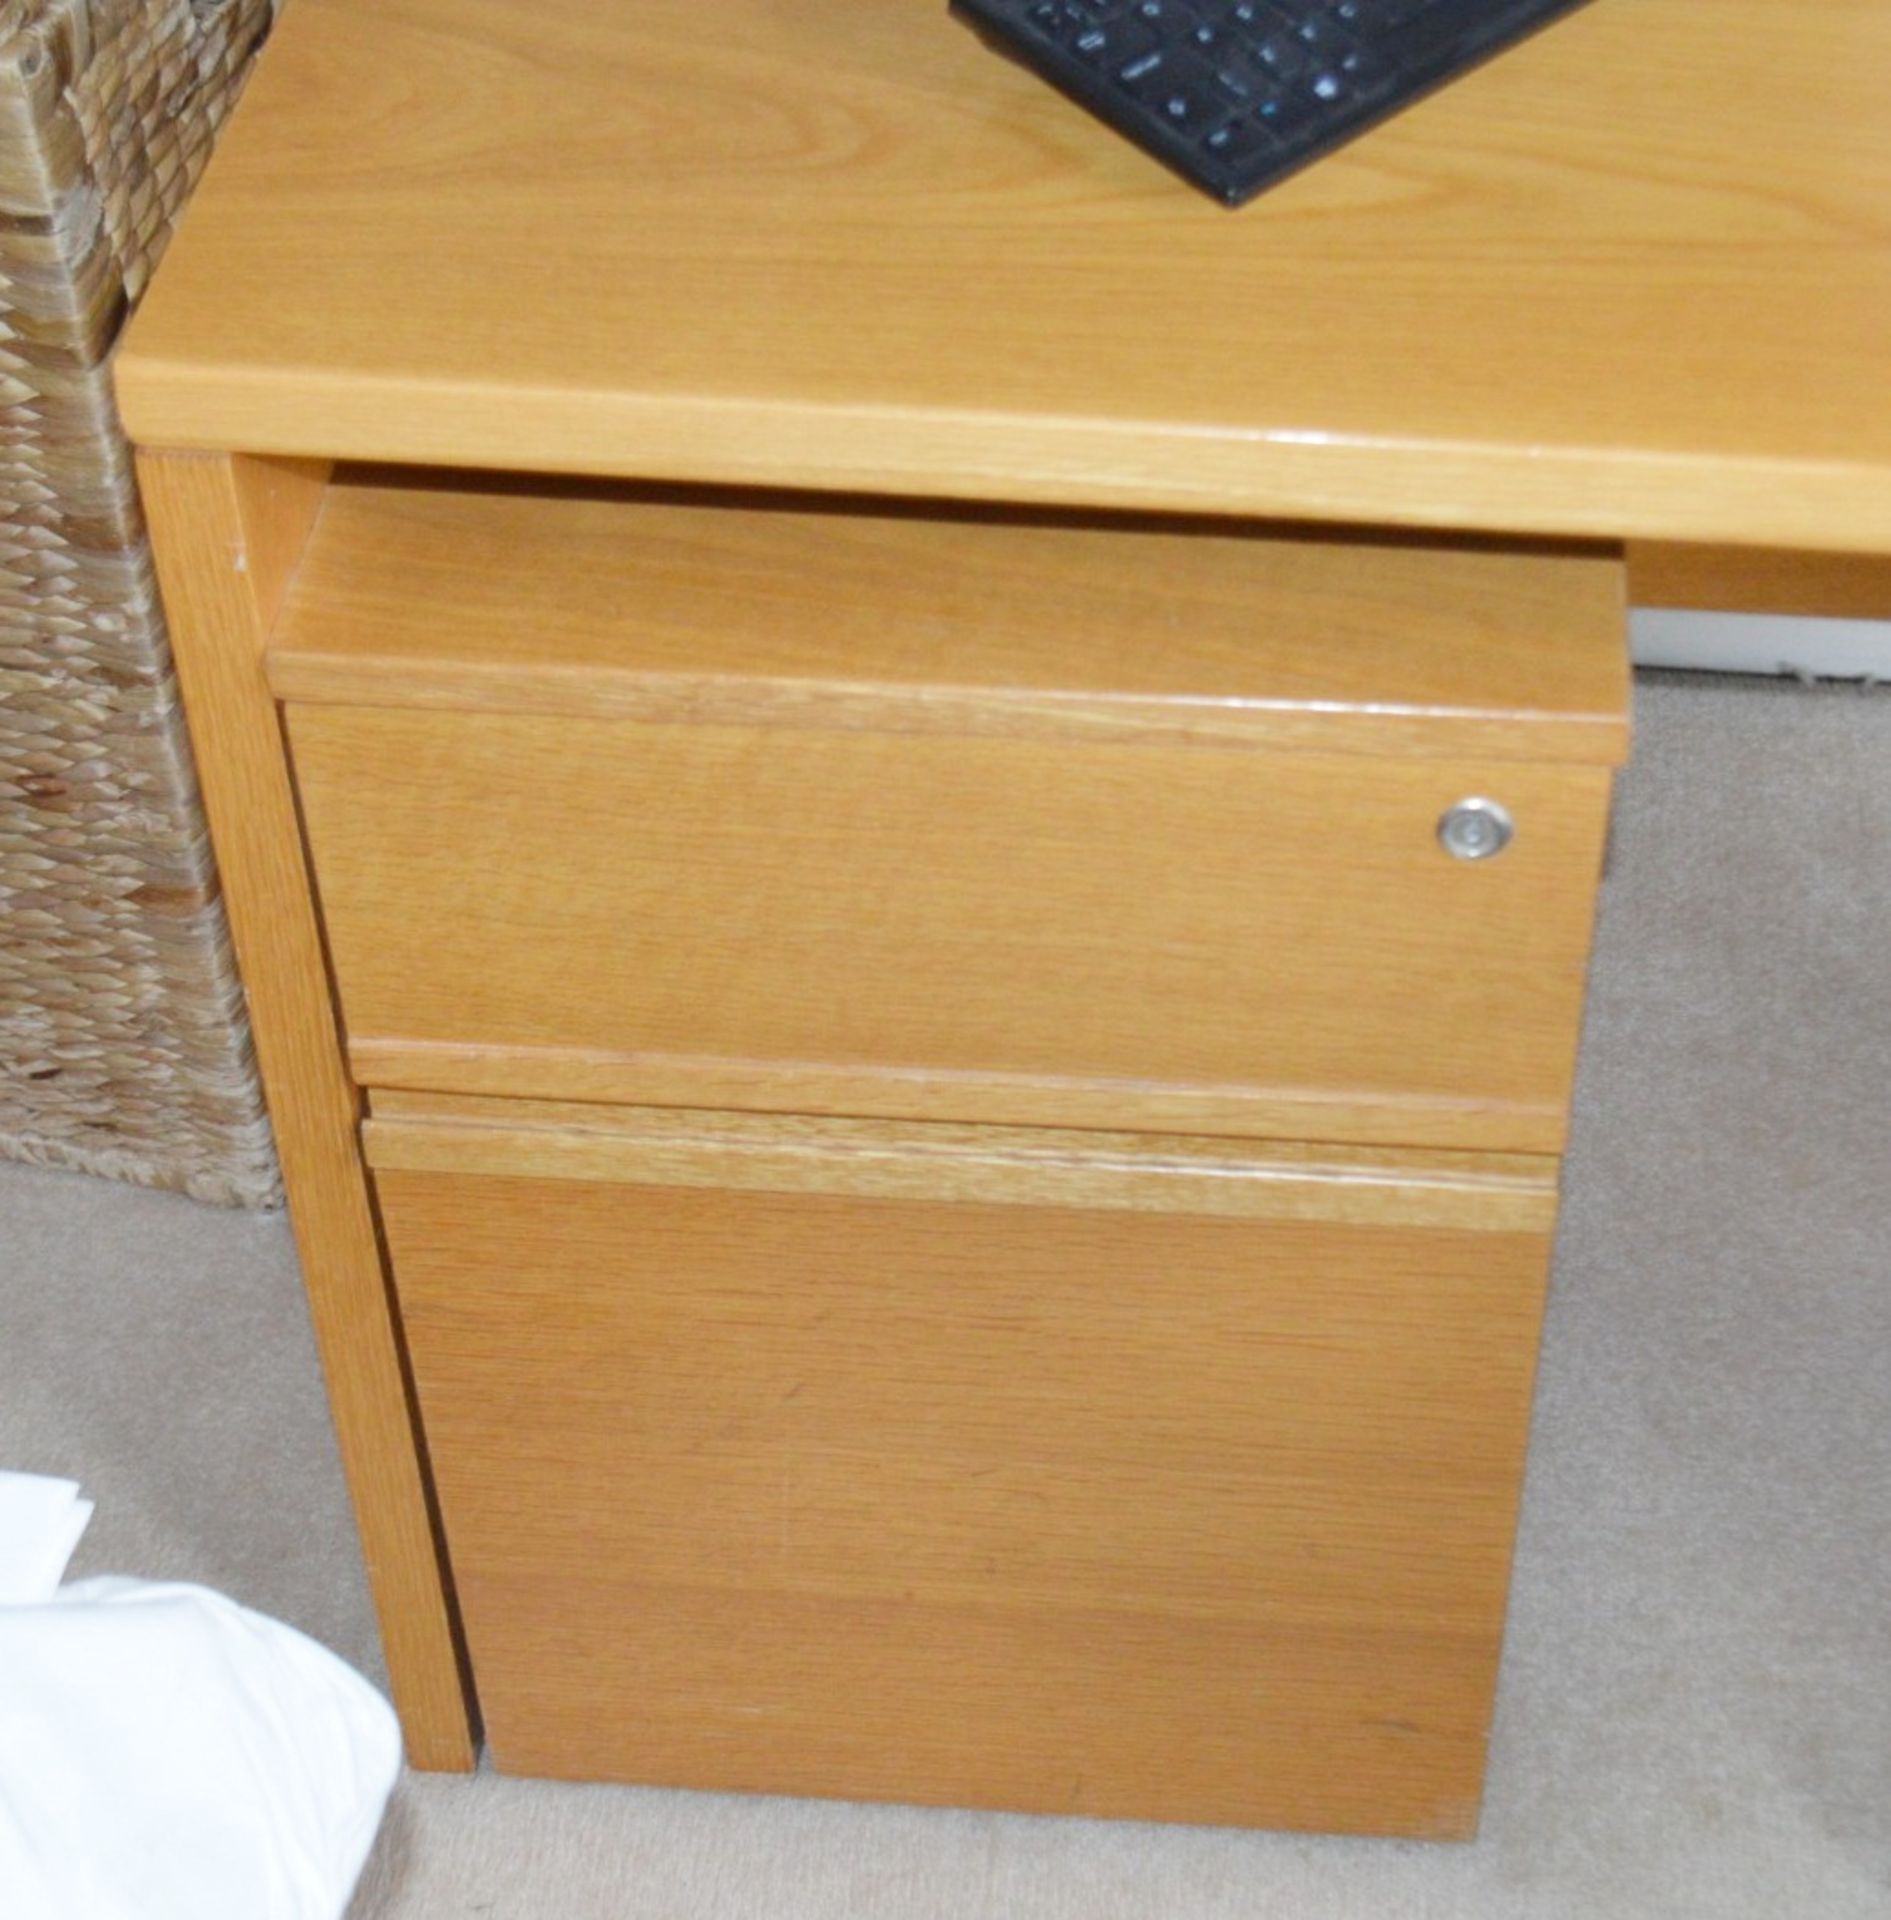 3-Piece Bedroom Set - Includes Desk, Chair And Wicker Basket - NO VAT ON THE HAMMER - CL630 - - Image 3 of 5